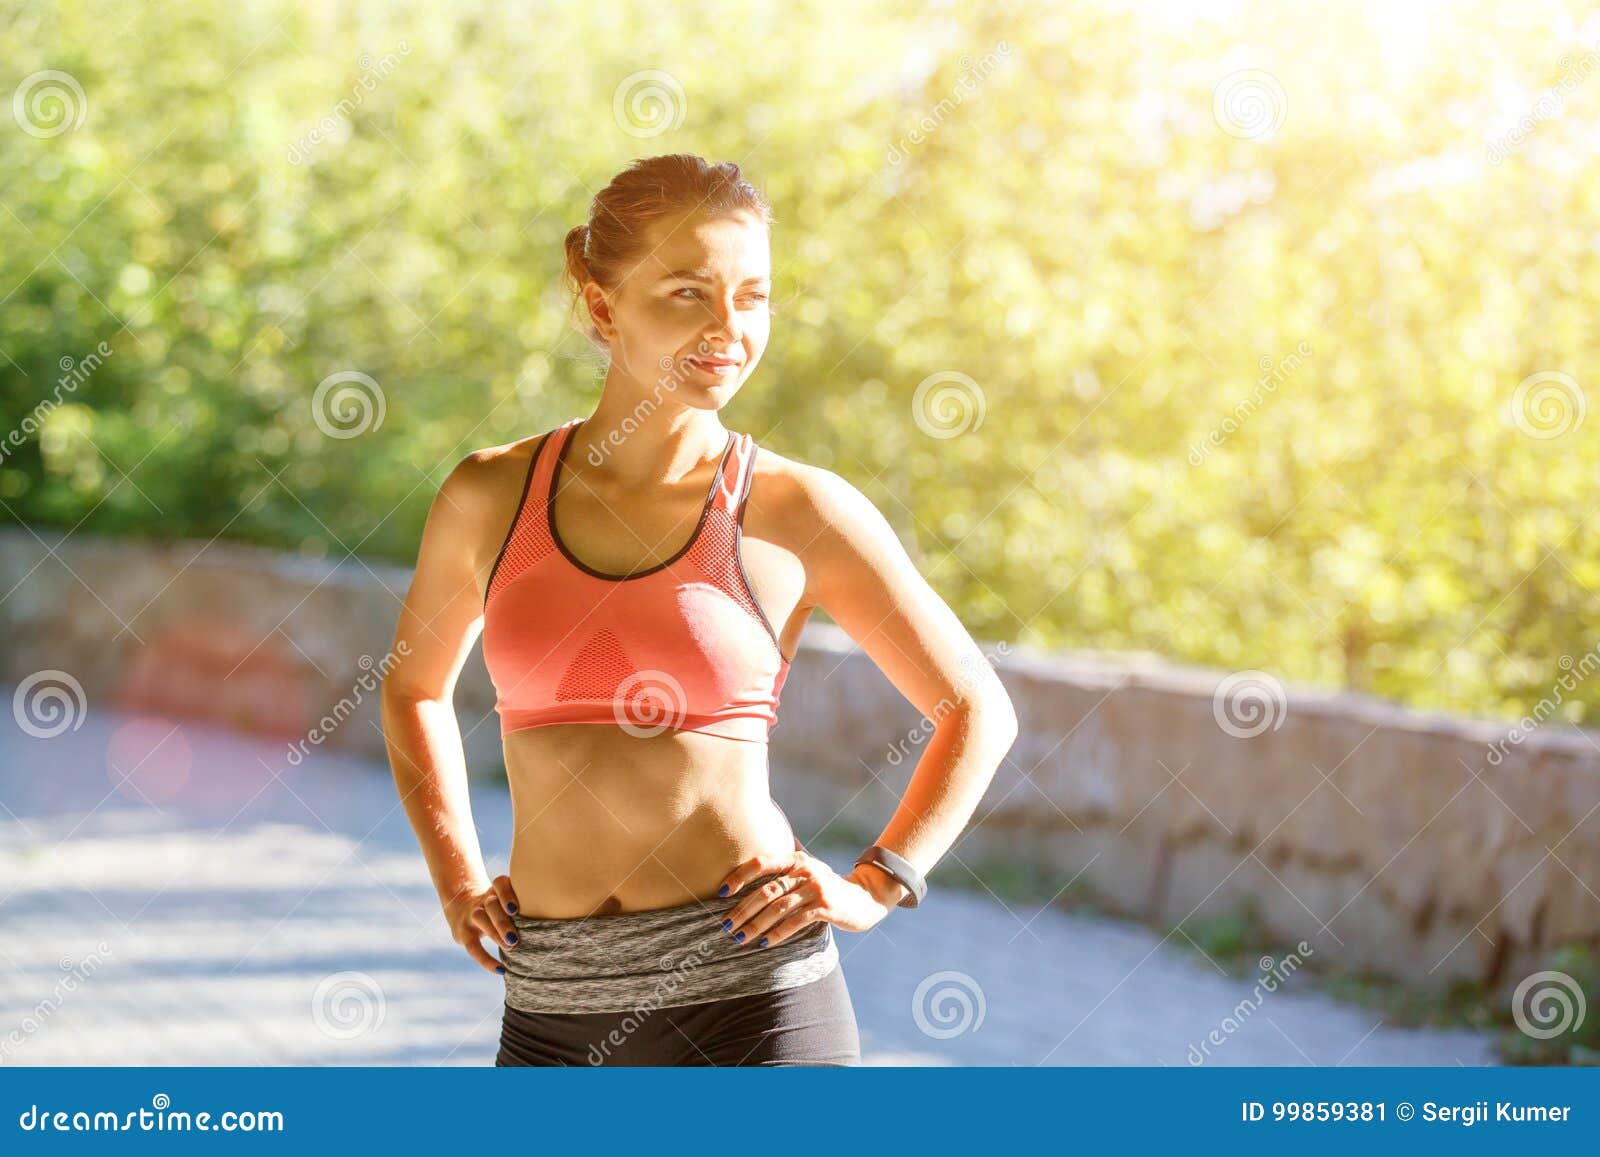 Young Slim Girl Resting after Run Training in Park Stock Image - Image ...